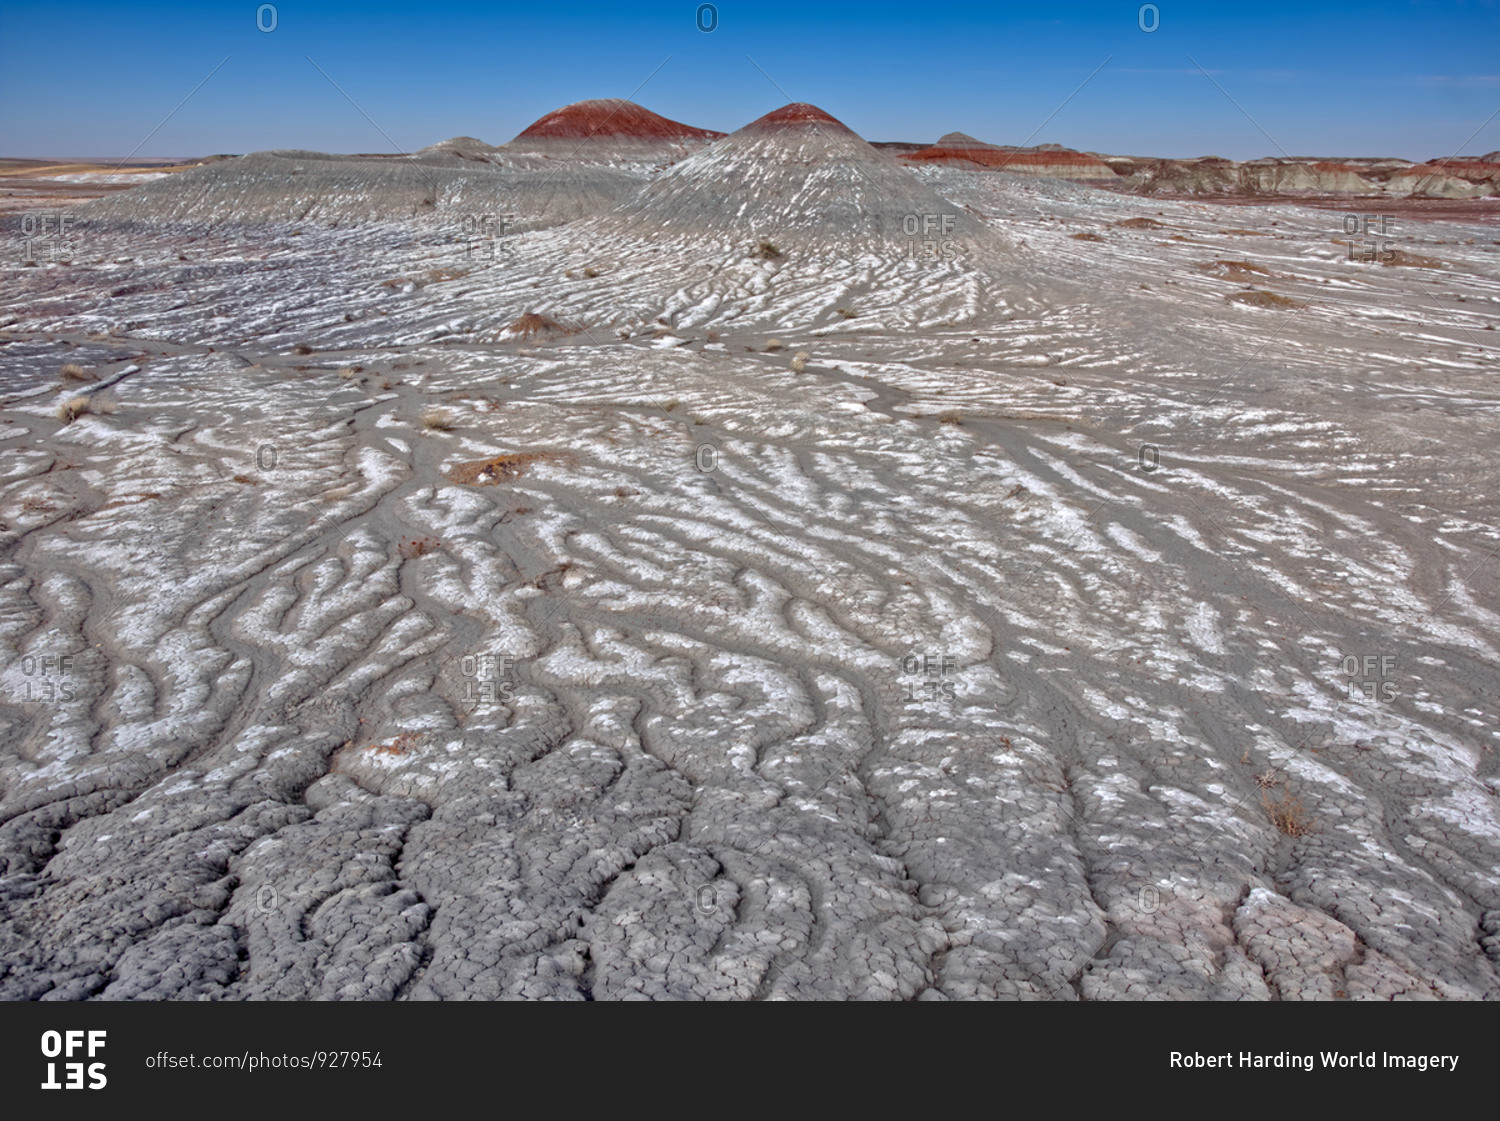 Salt covered hills of Bentonite in the Petrified Forest National Park along the Blue Forest Trail, Arizona, United States of America, North America